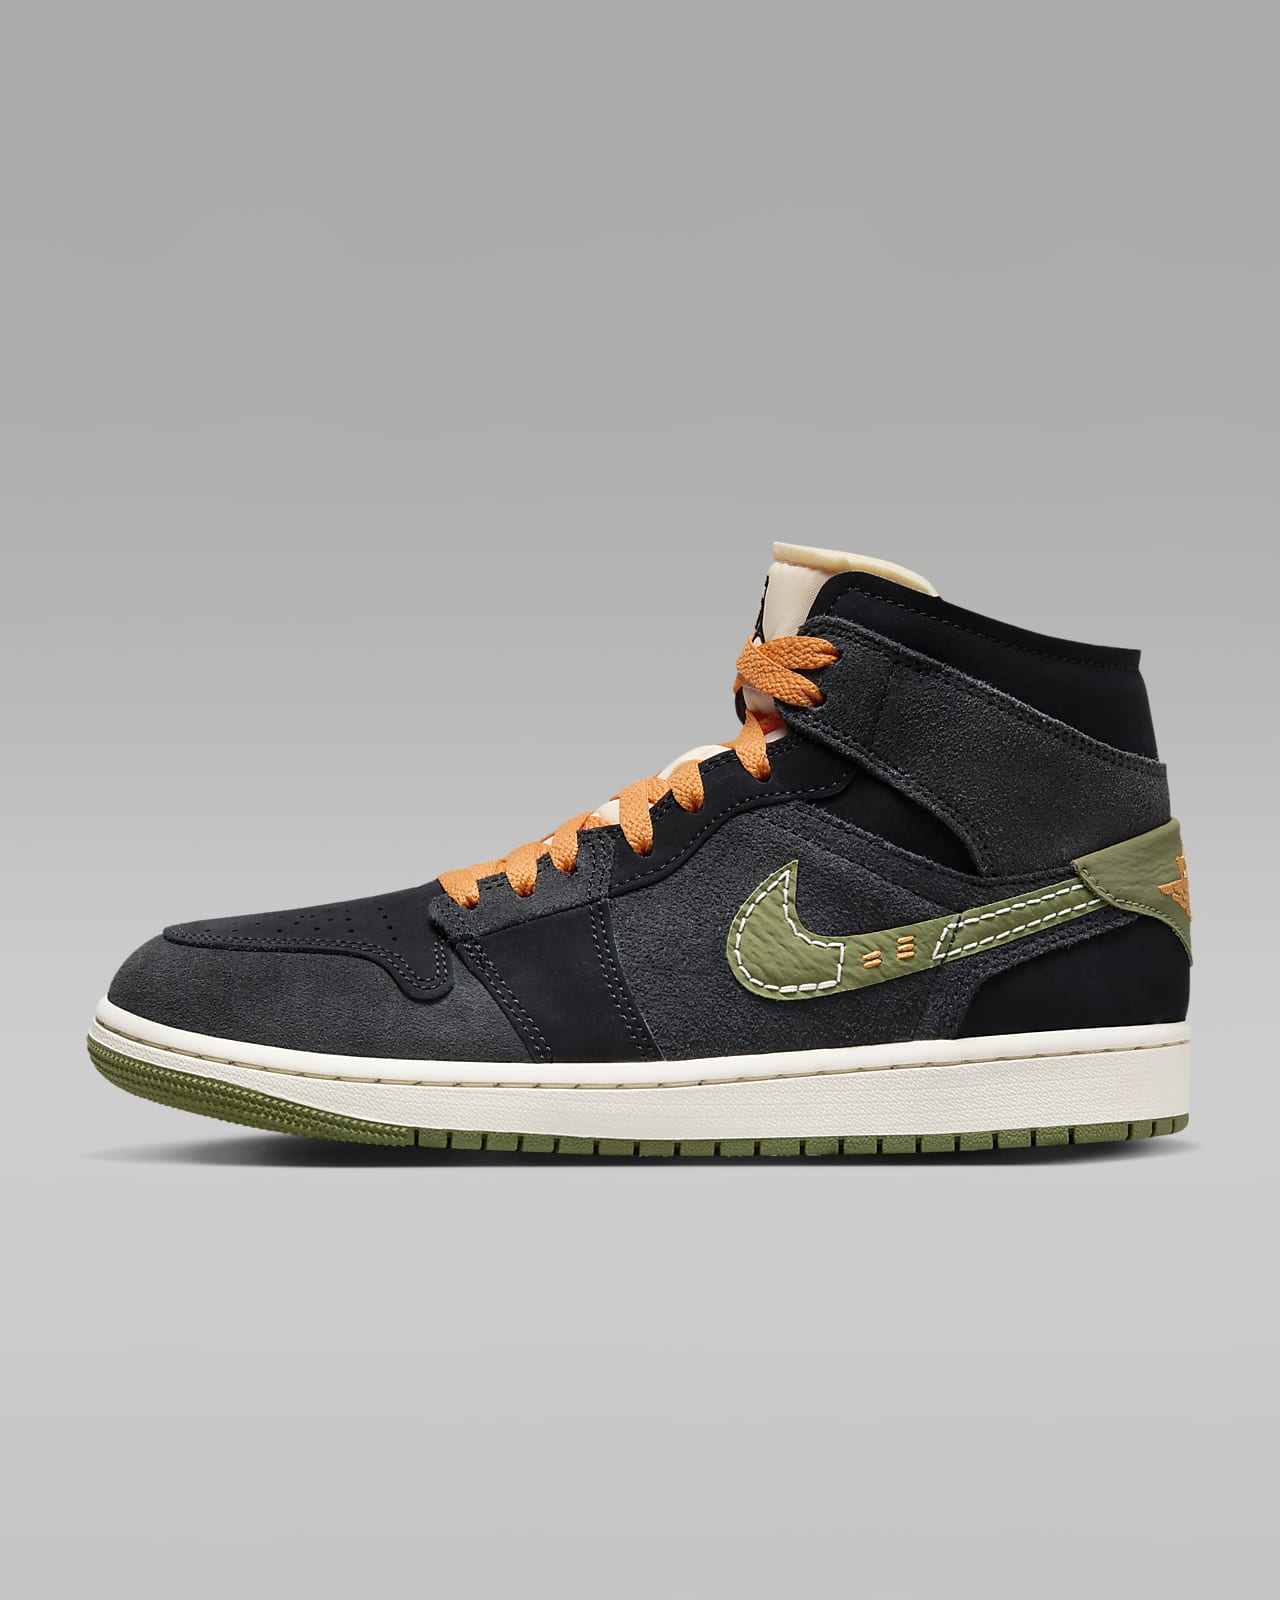 Rise to the Top with Air Jordan 1 Mid SE Craft Mens Shoes - The Must-Have Sneaker of the Season!